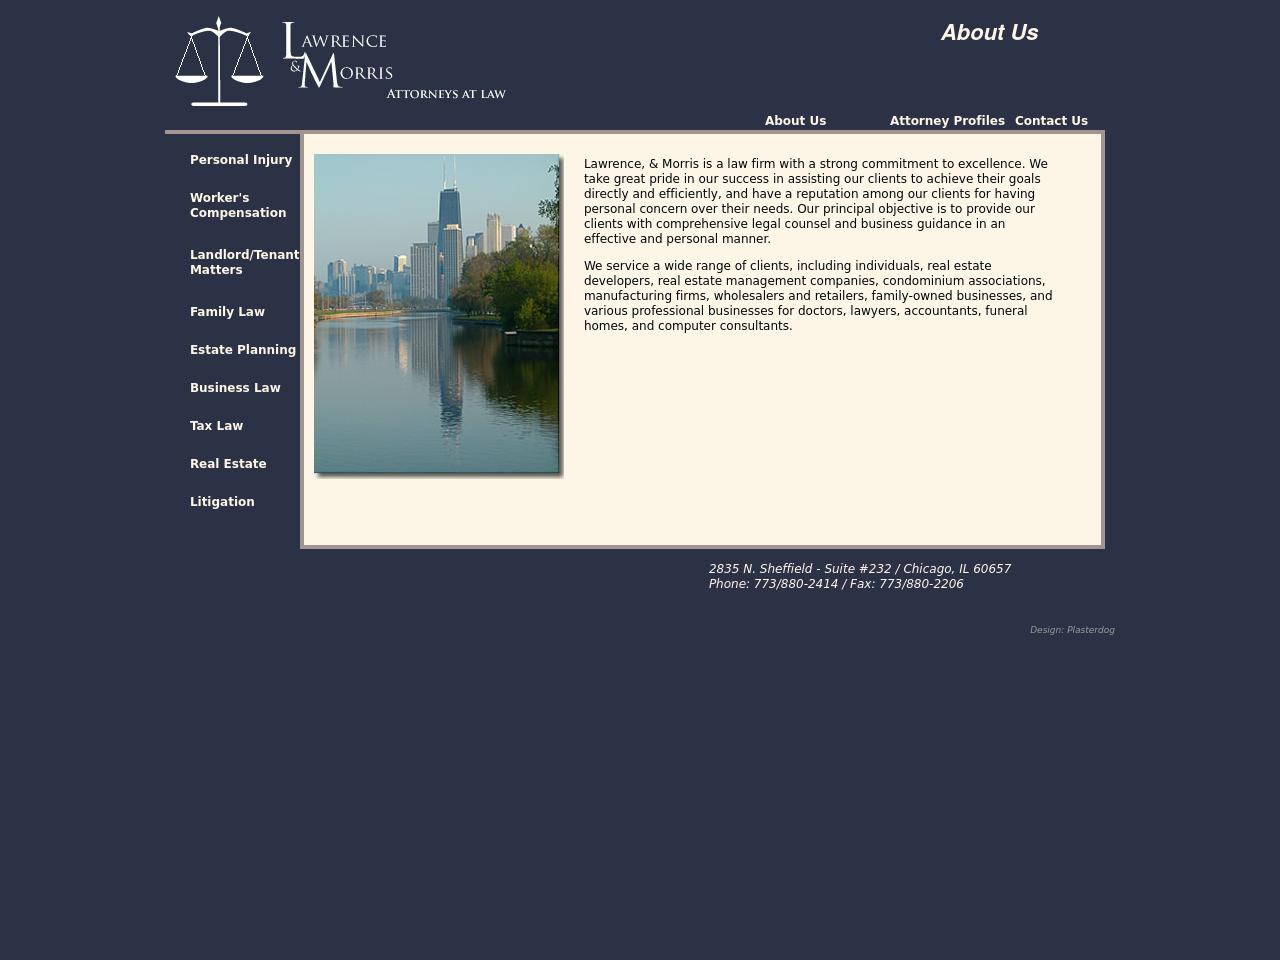 Lawrence & Morris Attorneys - Chicago IL Lawyers